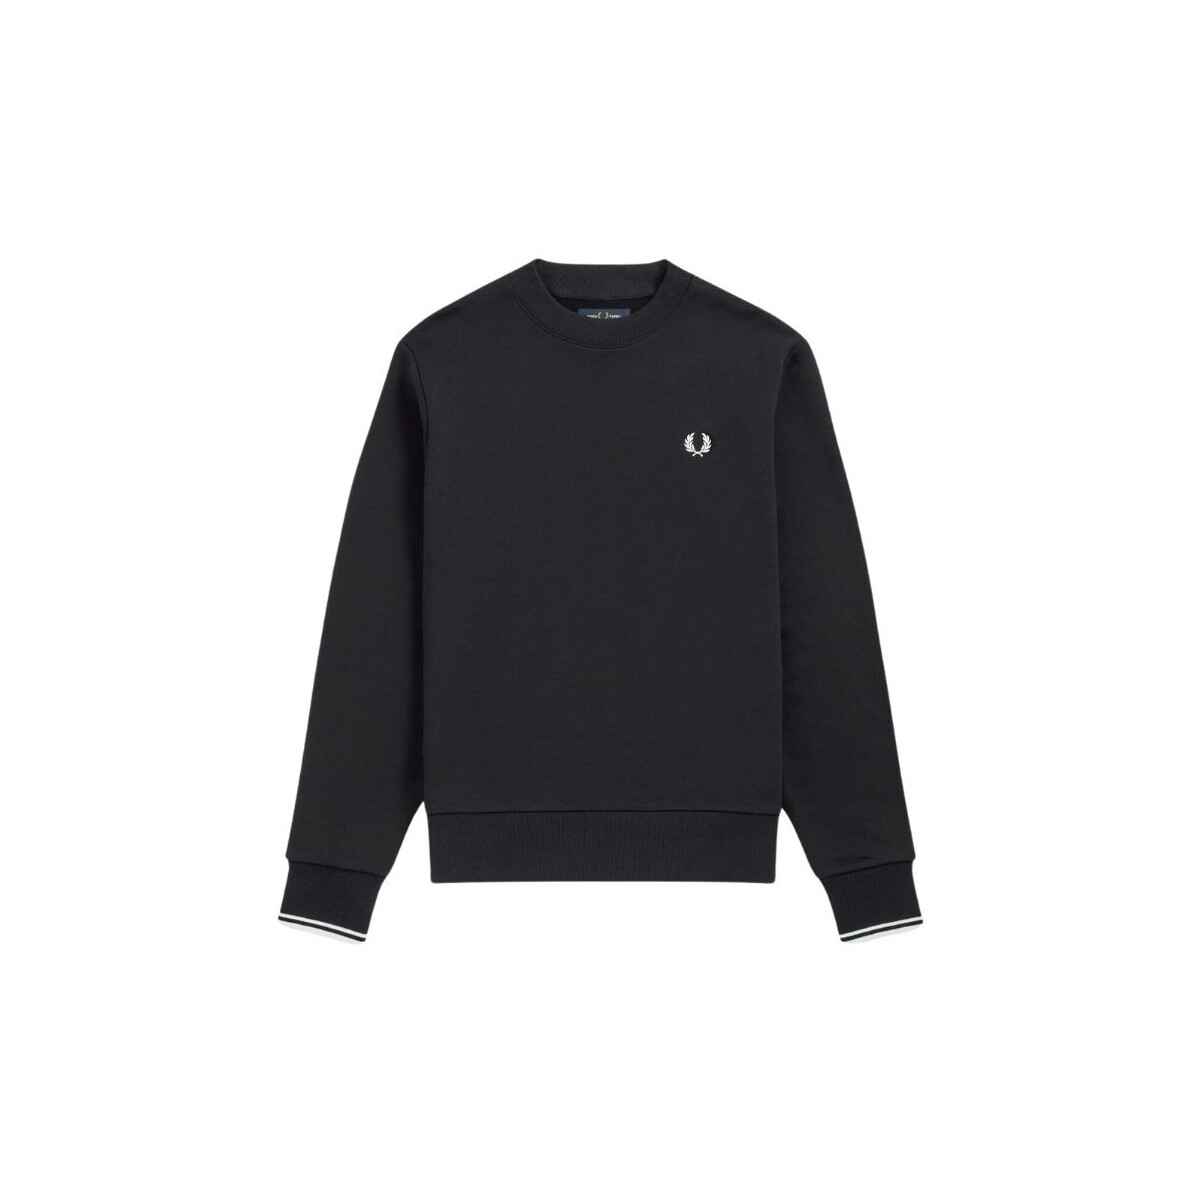 Vêtements Homme Sweats Fred Perry  Marine